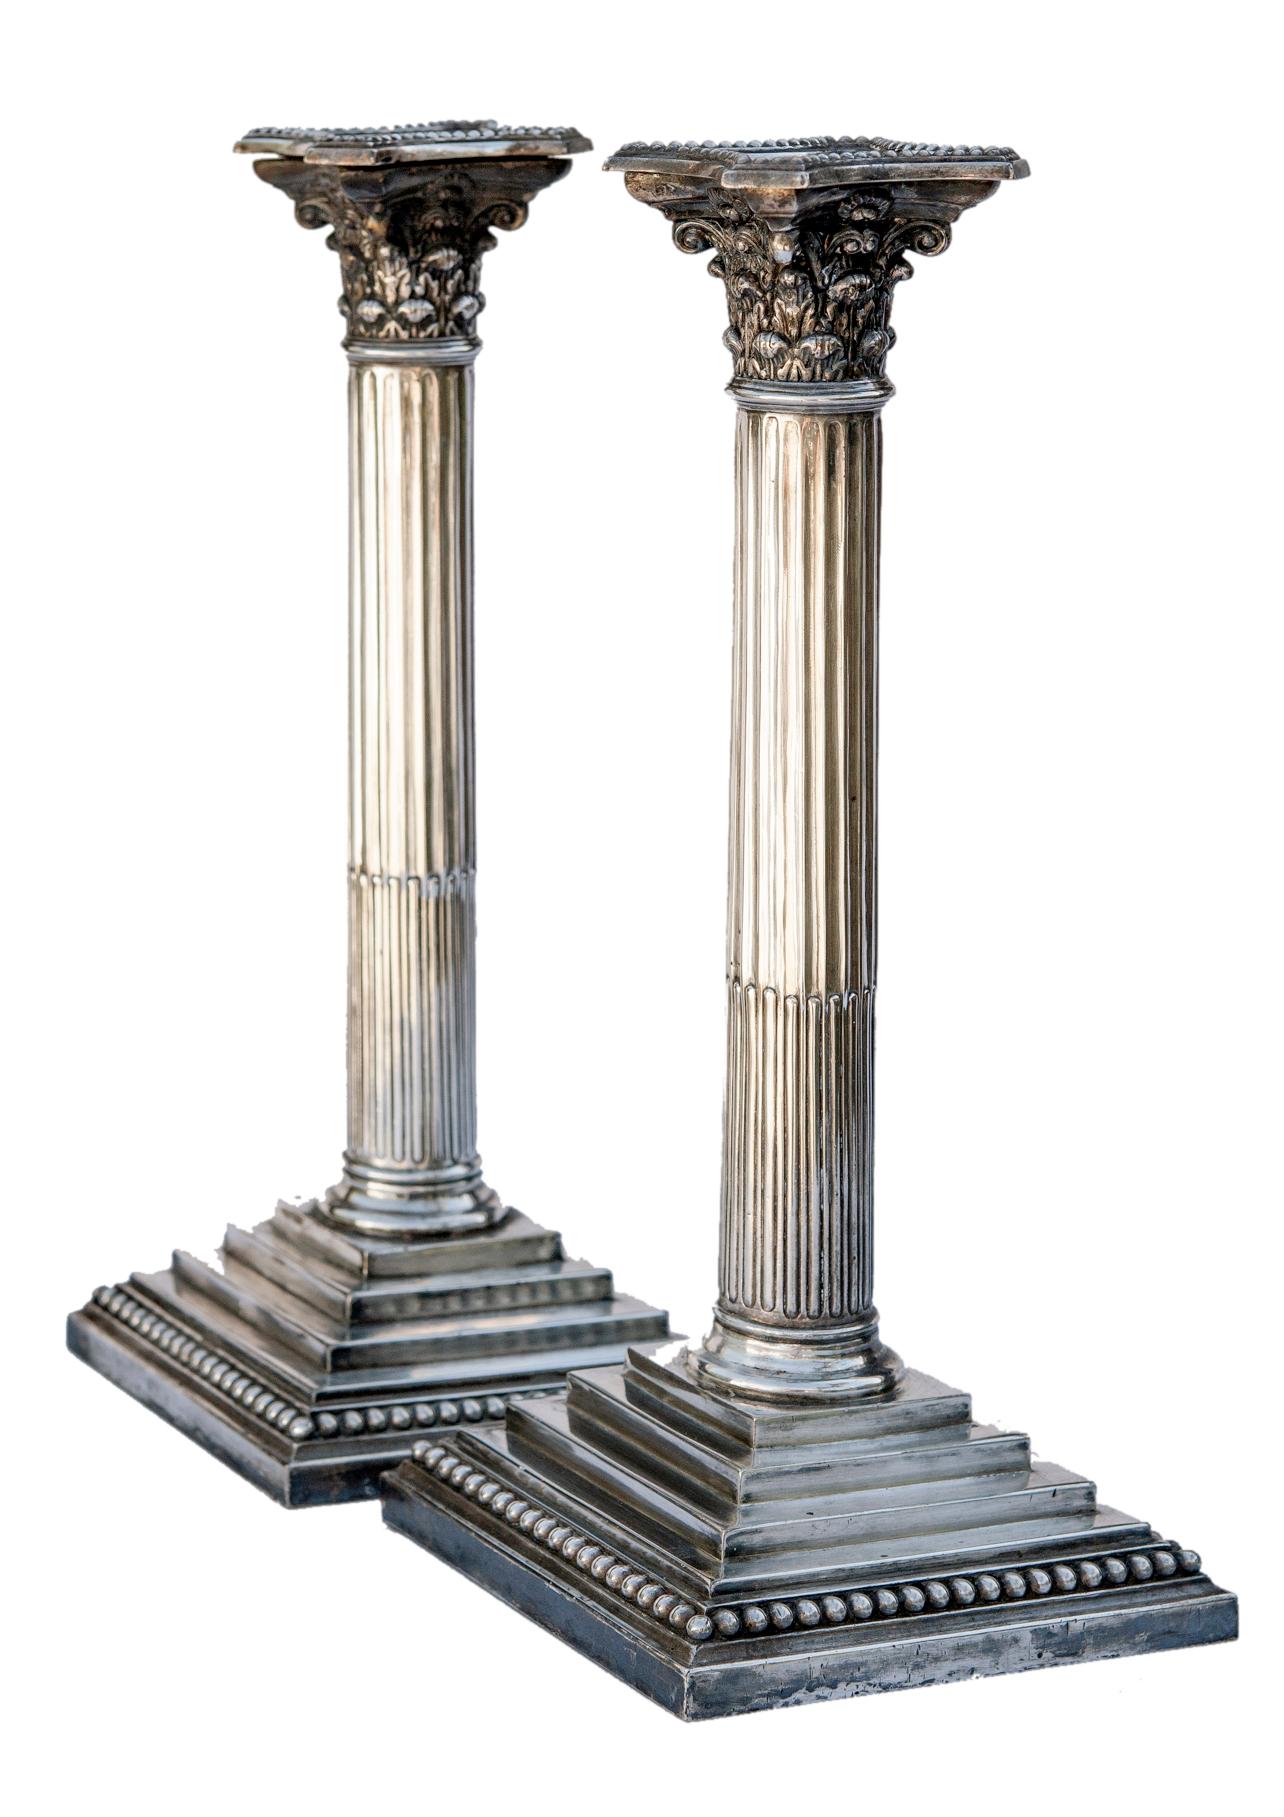 Pair late 19th early 20th century English neoclassical silverplate column candlesticks.
Square bases with steps up to the column. On the square base sits fluted round columns.
Made in Sheffield, UK at a minor boutique silversmith.